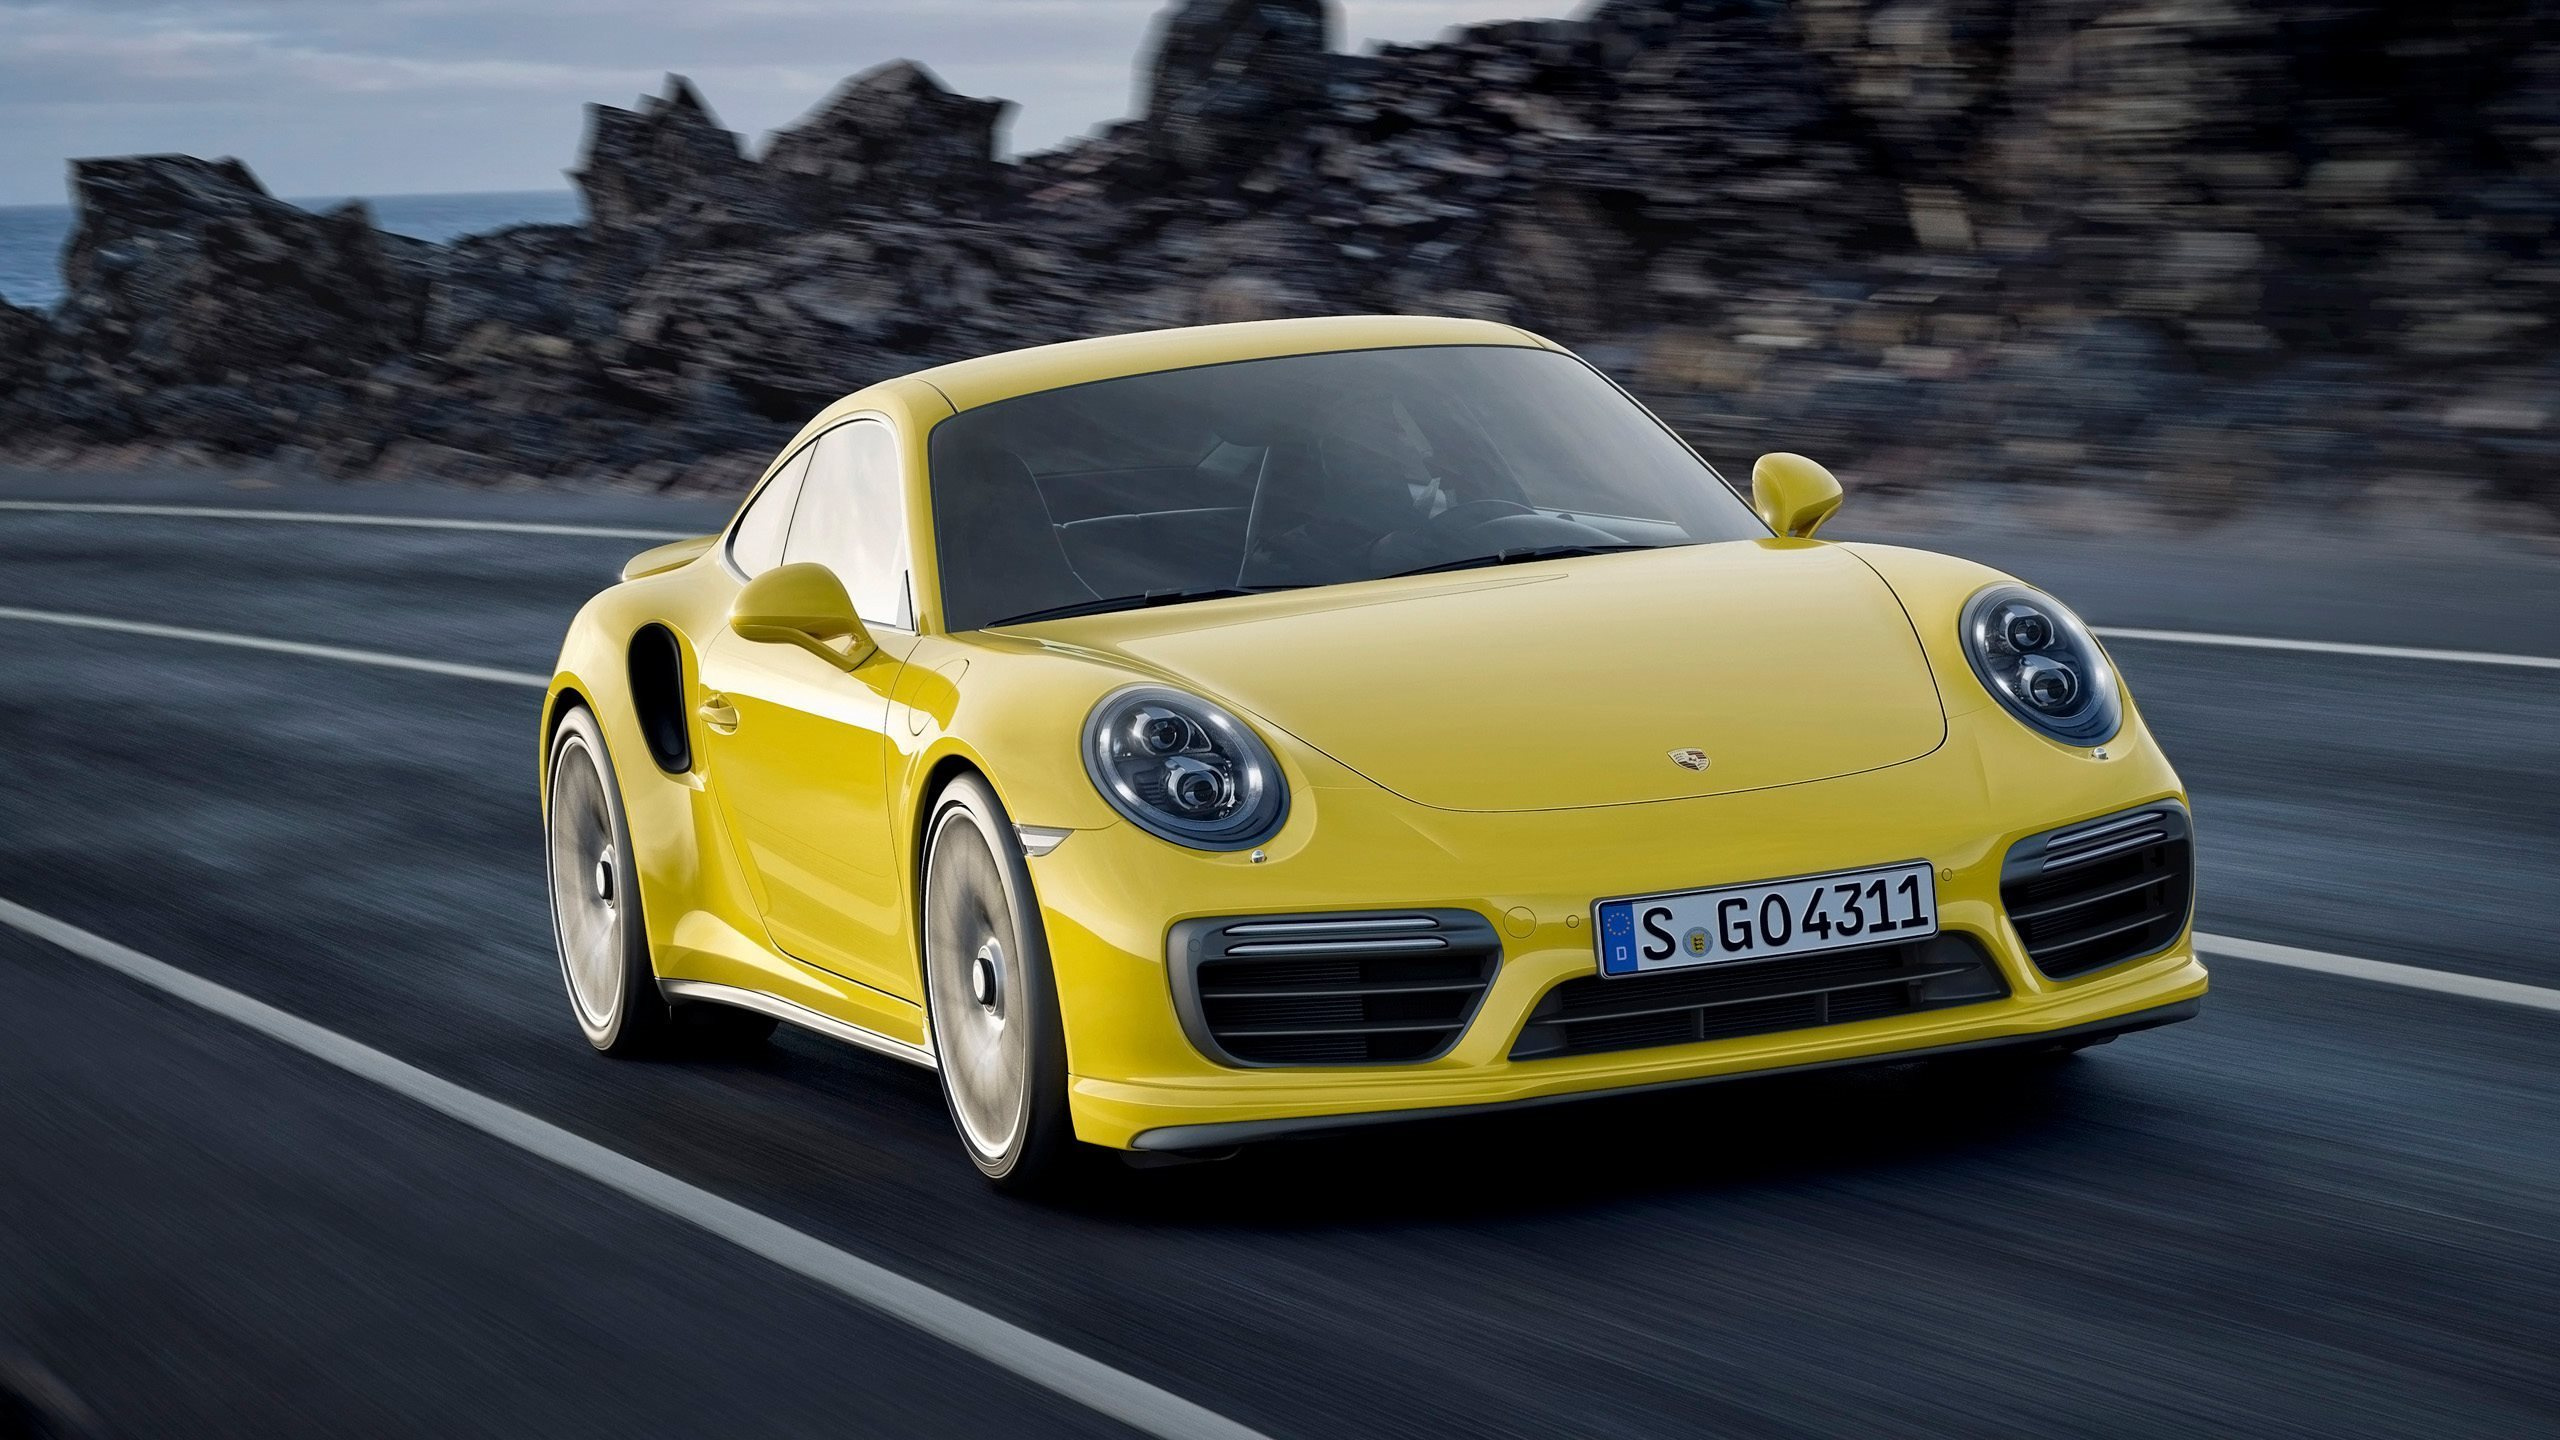 Yellow Porsche 911 on Road During Daytime. Wallpaper in 2560x1440 Resolution